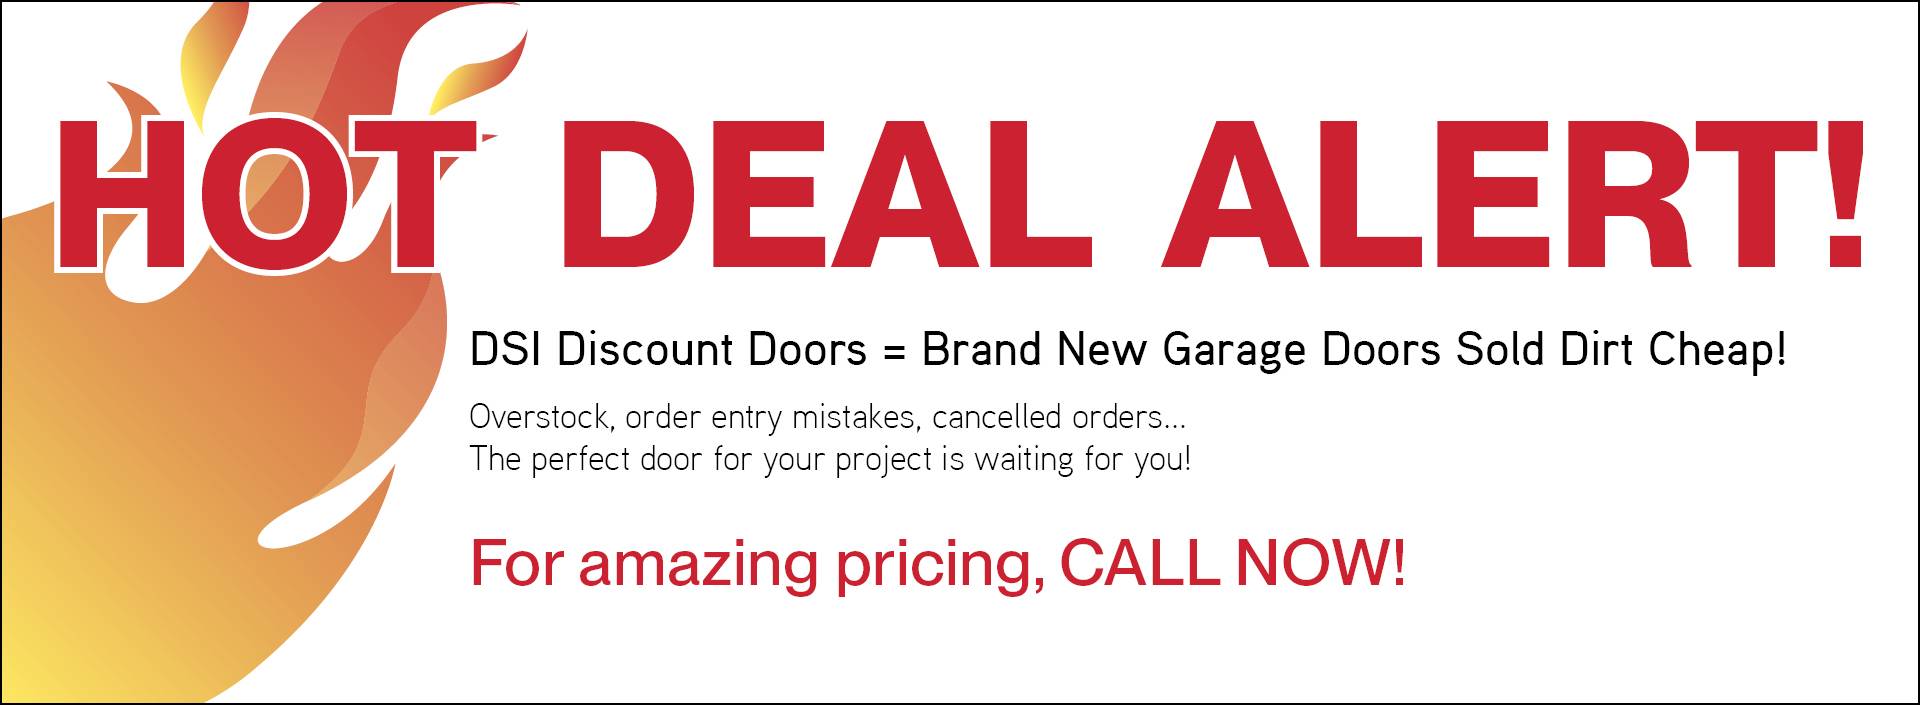 HOT DEAL ALERT! Brand New Garage Doors Sold Dirt Cheap! For amazing, pricing, CALL NOW!